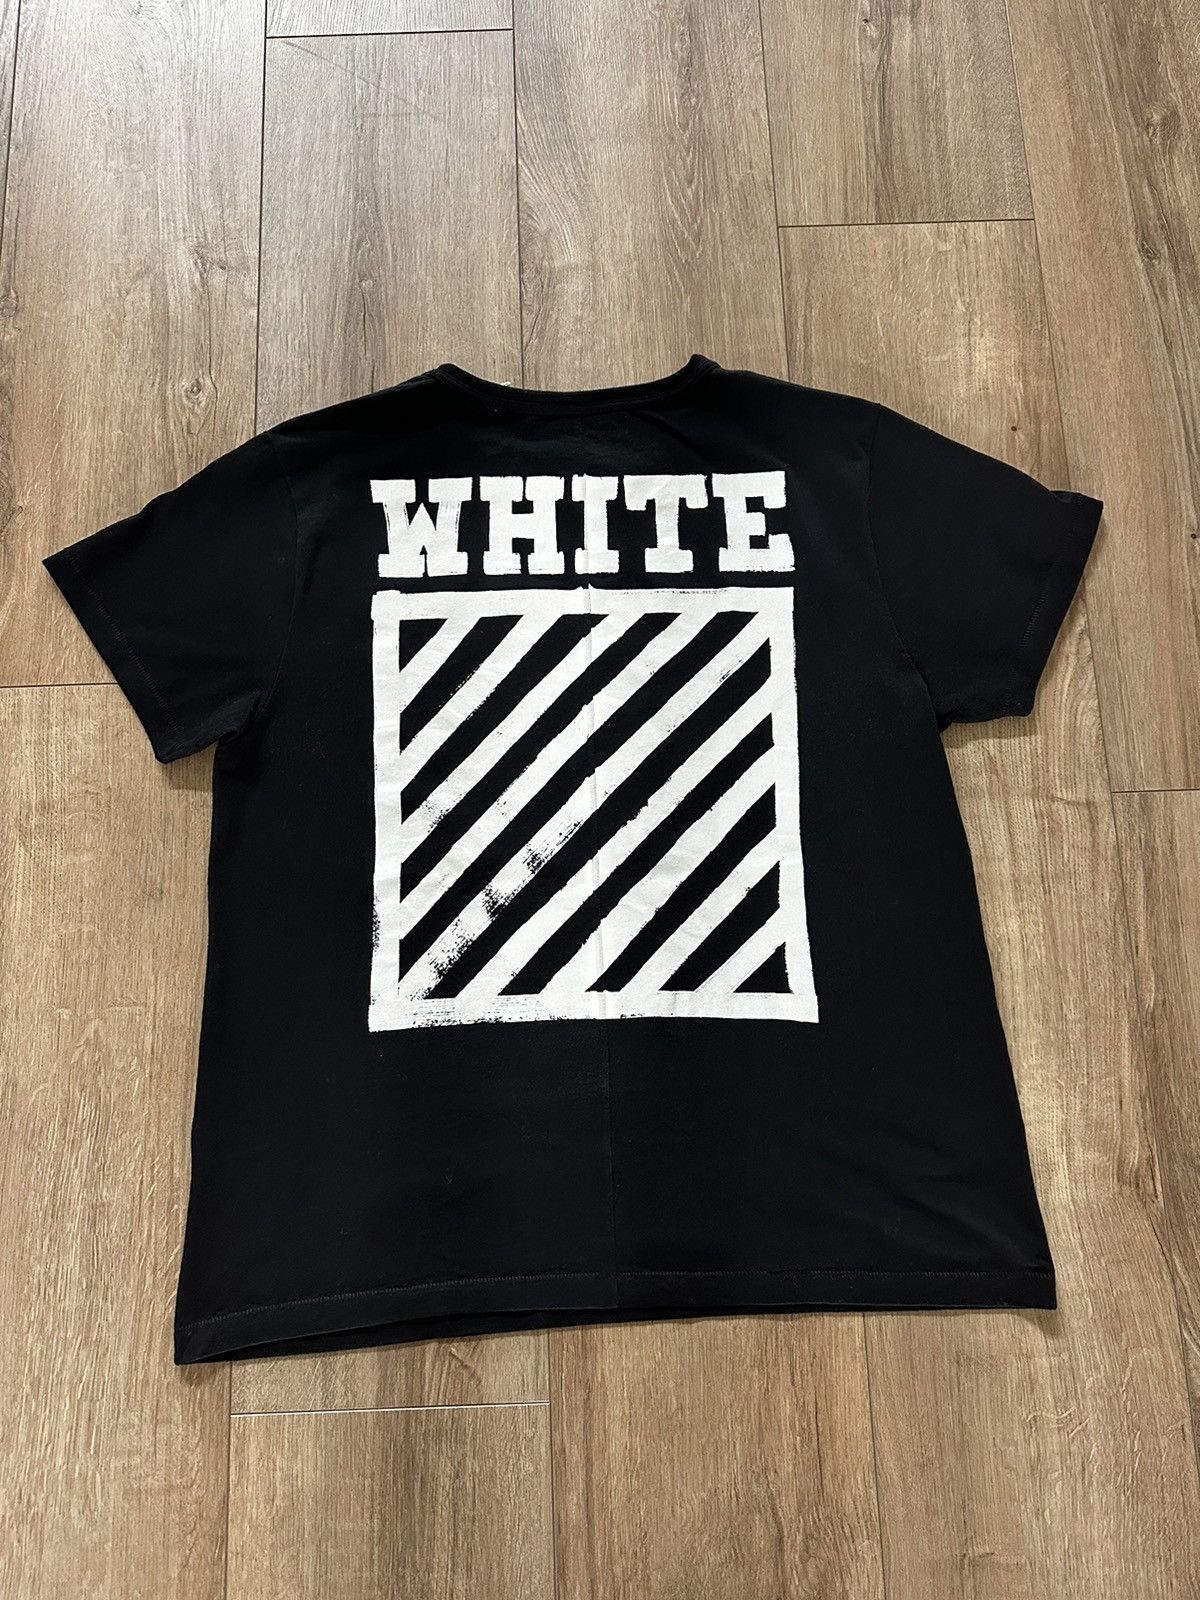 Off-White First Collection Off White Black T-Shirt | Grailed